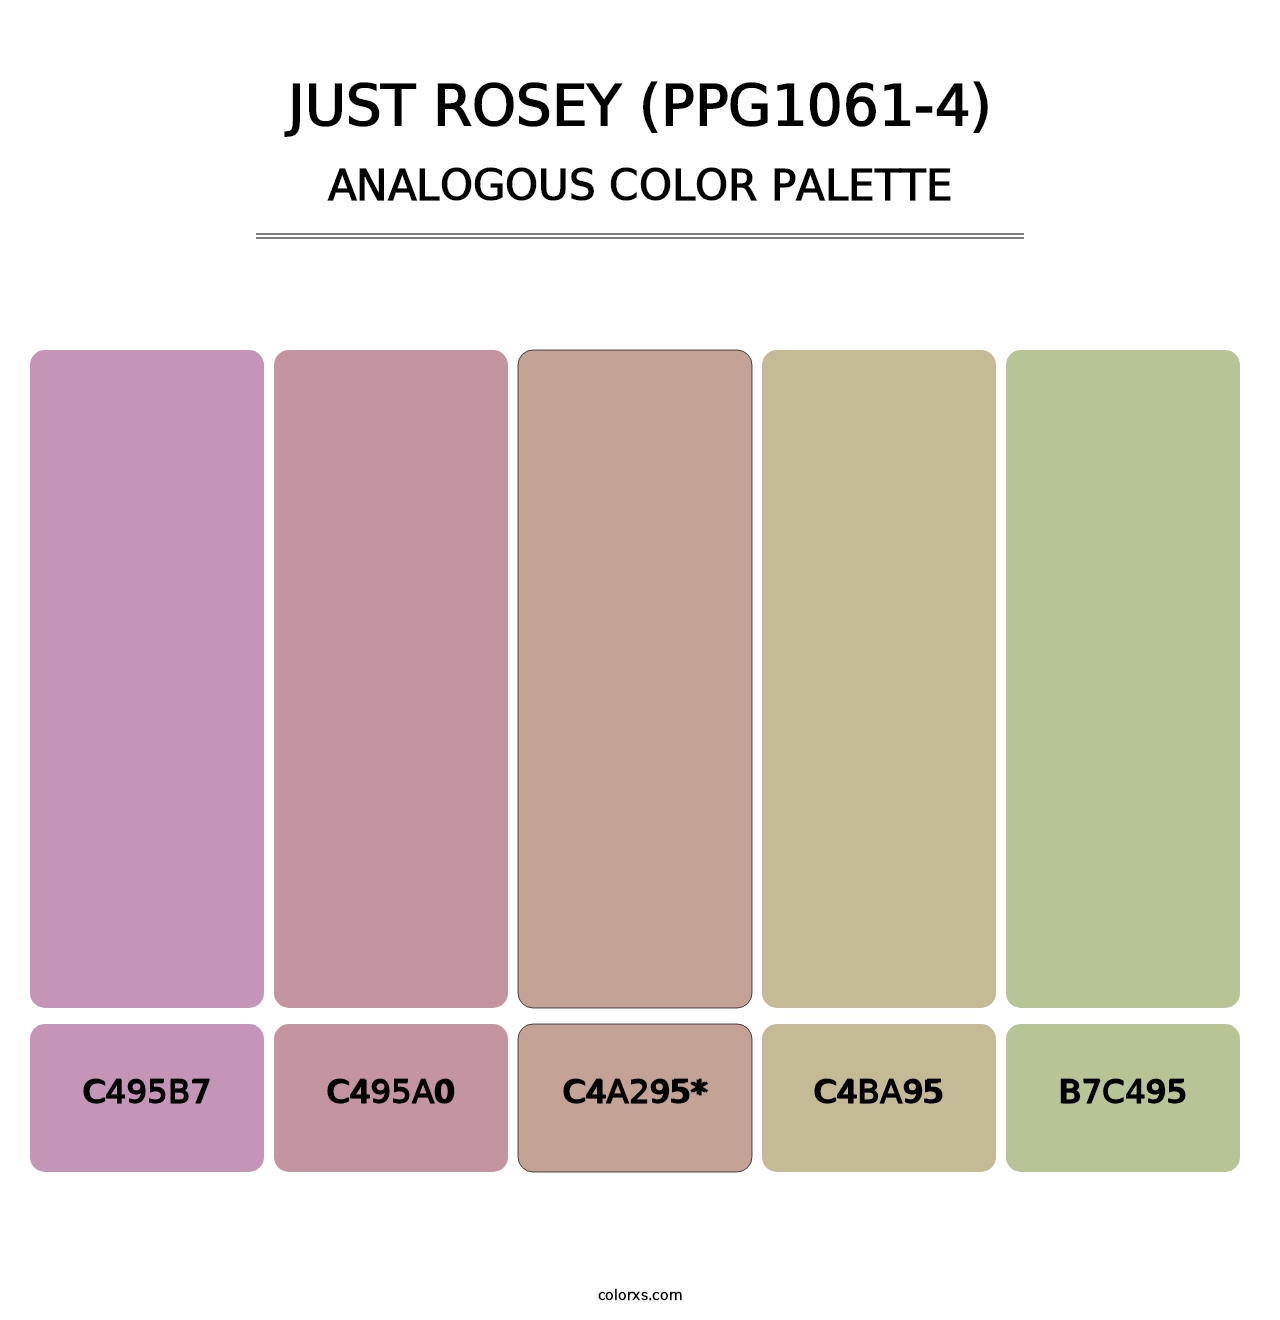 Just Rosey (PPG1061-4) - Analogous Color Palette